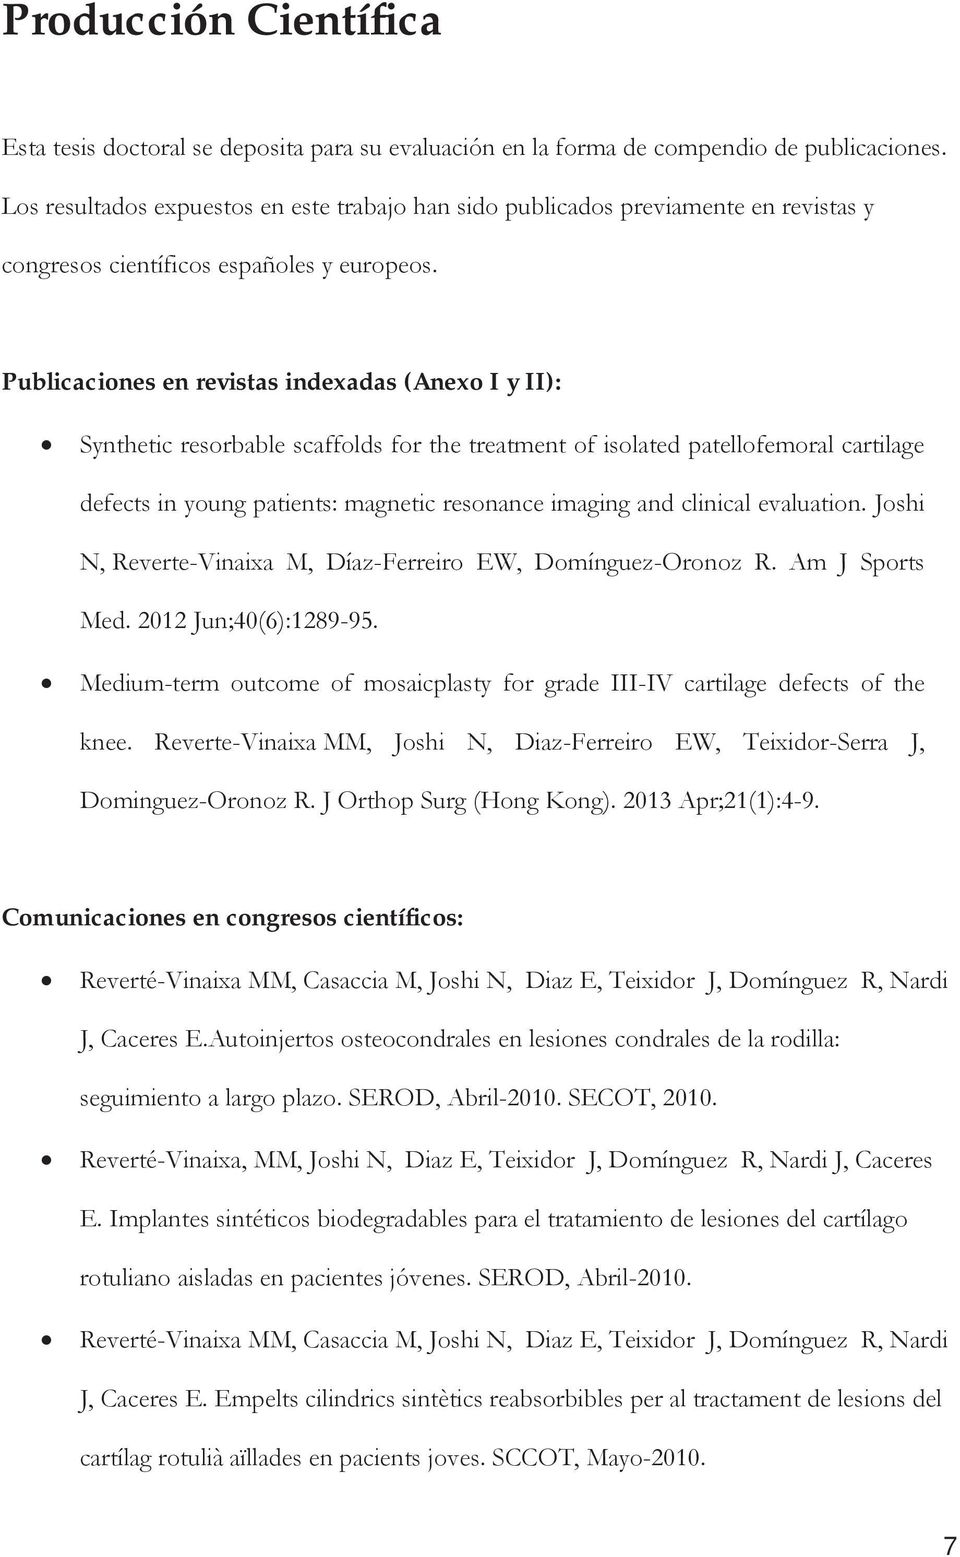 Publicaciones en revistas indexadas (Anexo I y II): Synthetic resorbable scaffolds for the treatment of isolated patellofemoral cartilage defects in young patients: magnetic resonance imaging and